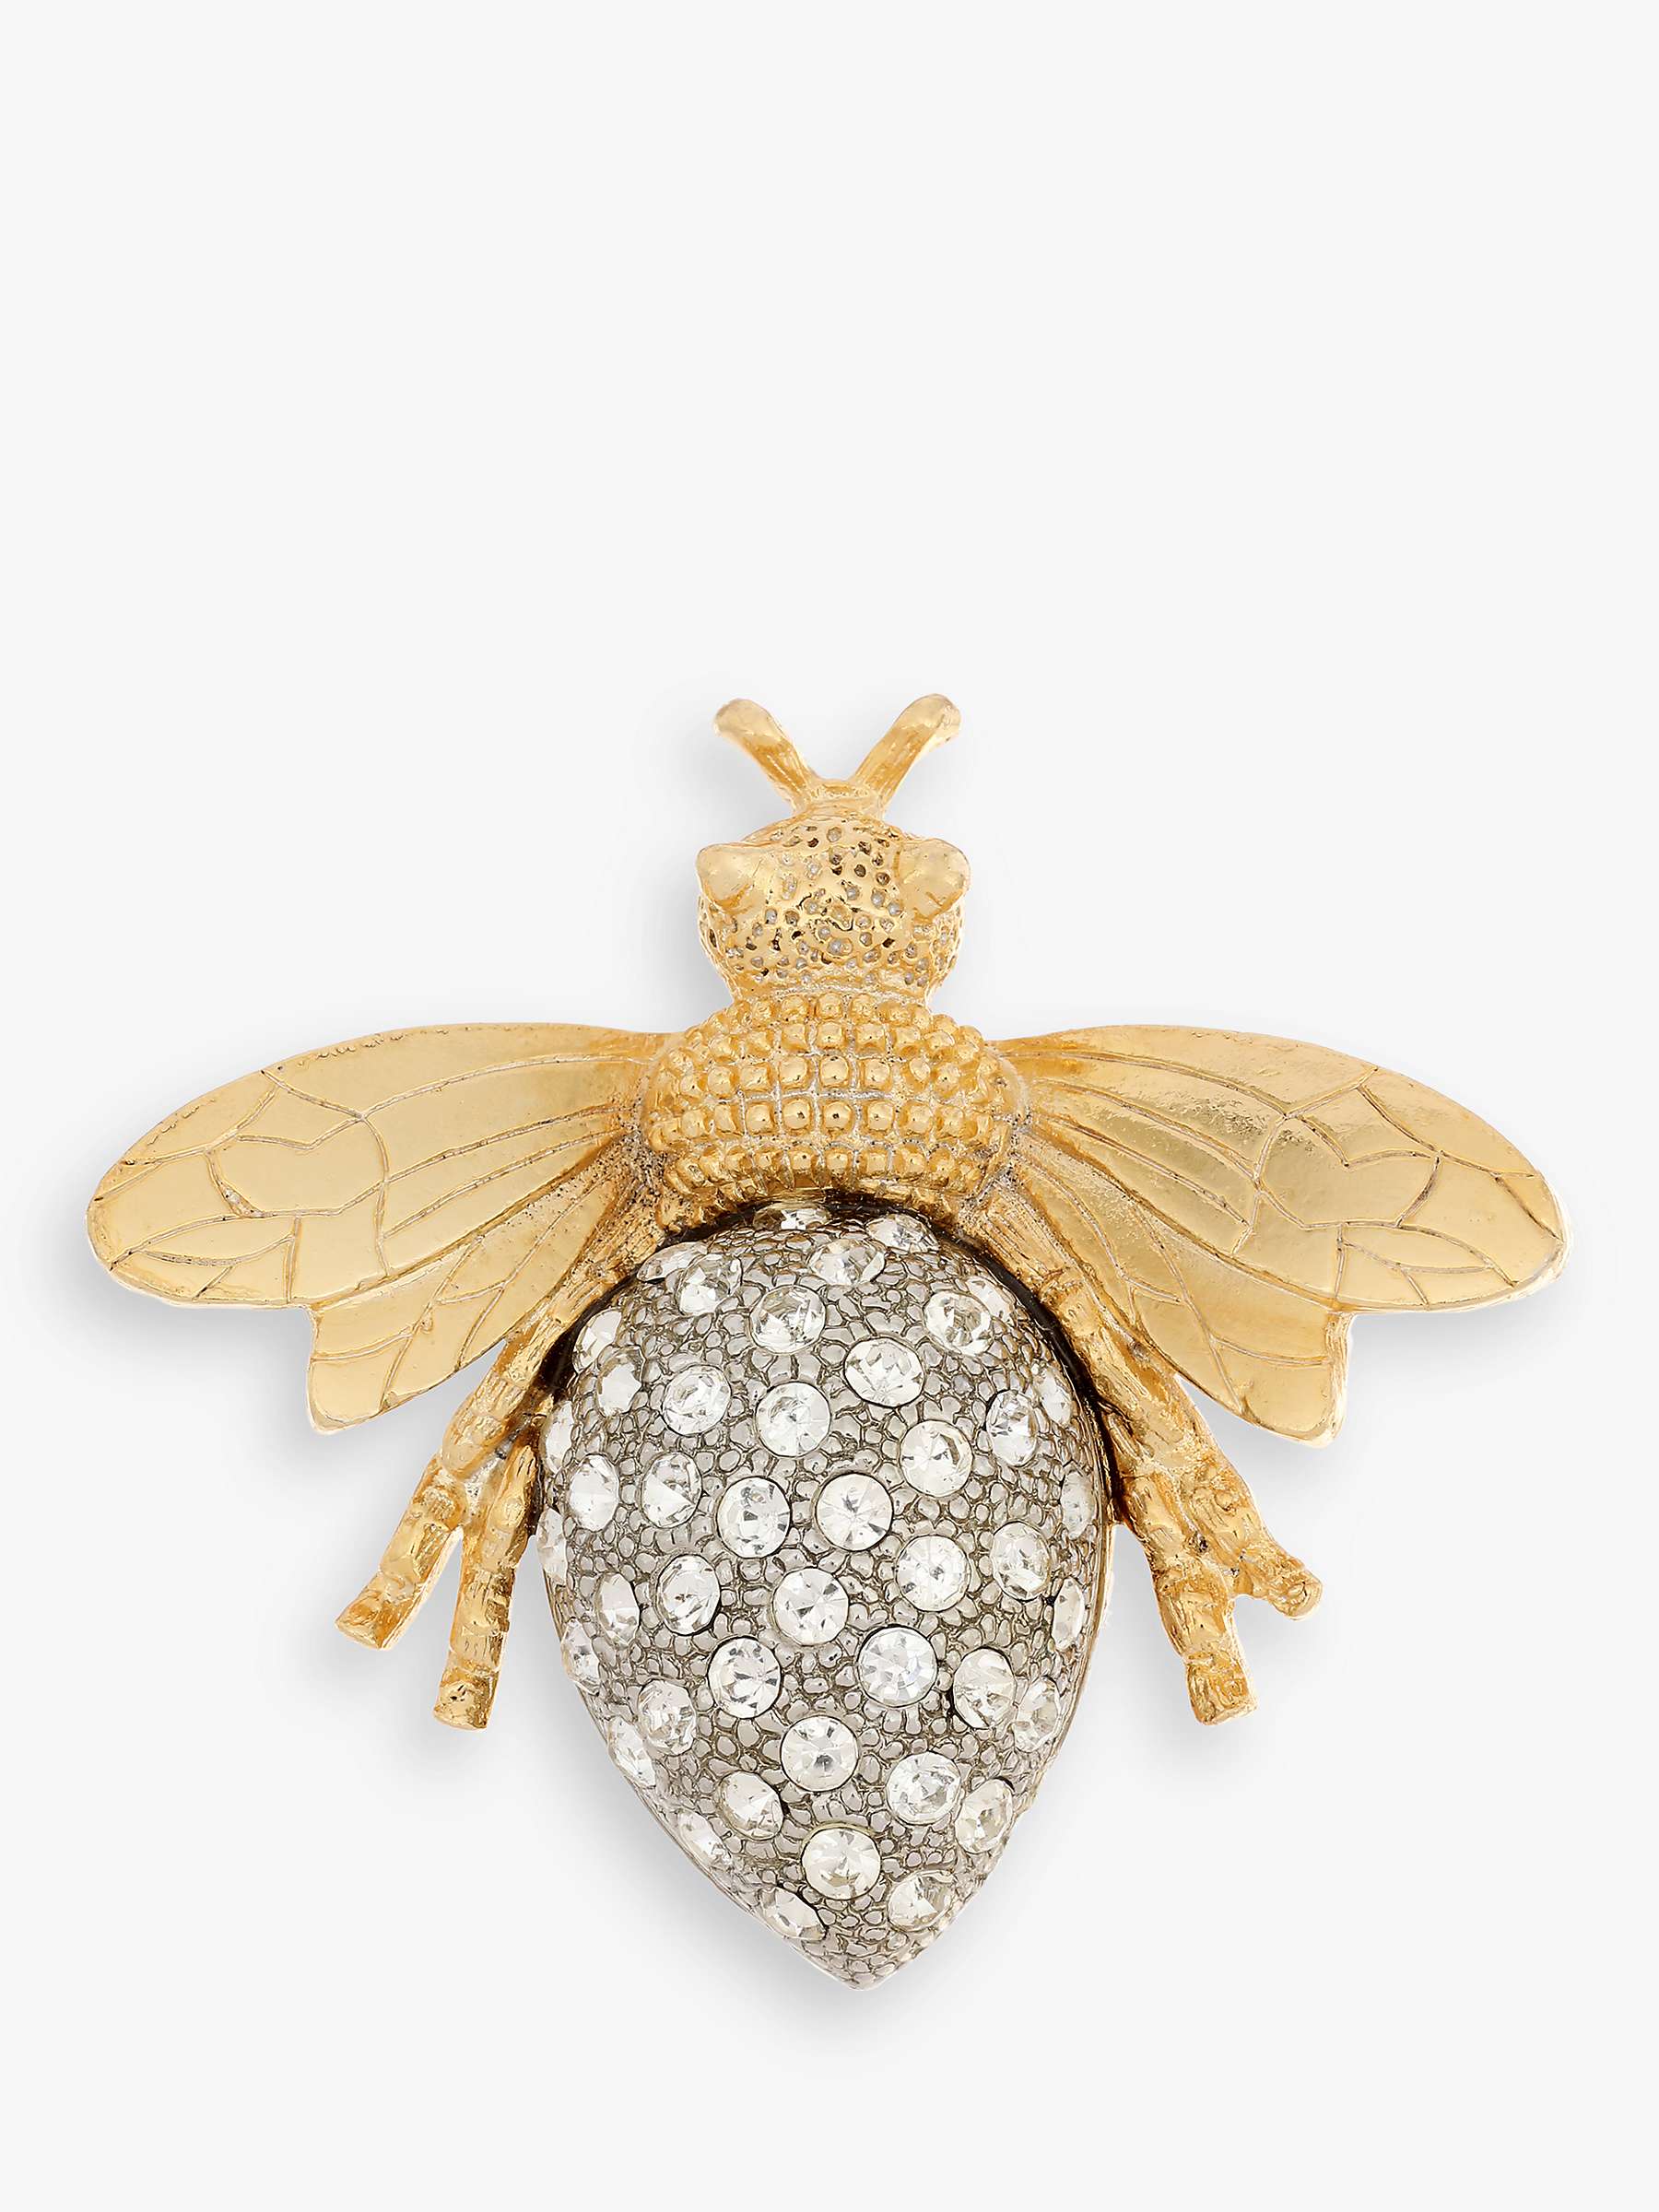 Buy Eclectica Vintage Swarovski Crystal Bumble Bee Brooch, Dated Circa 1980s, Gold/Silver Online at johnlewis.com